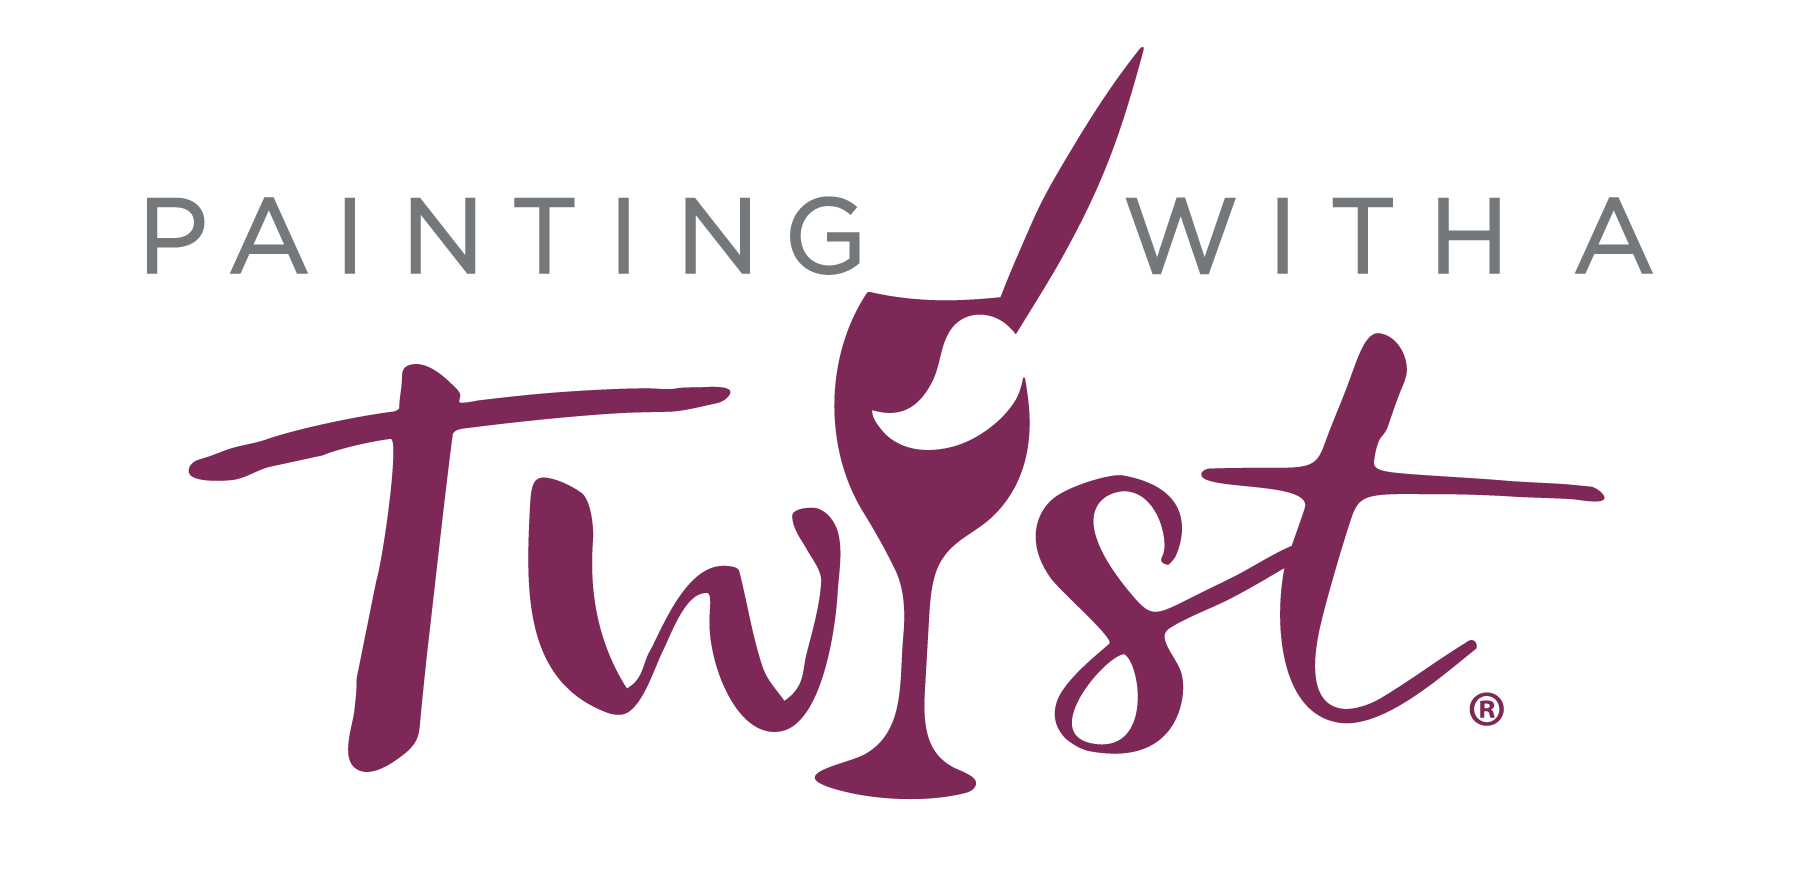 Painting with a Twist Logo